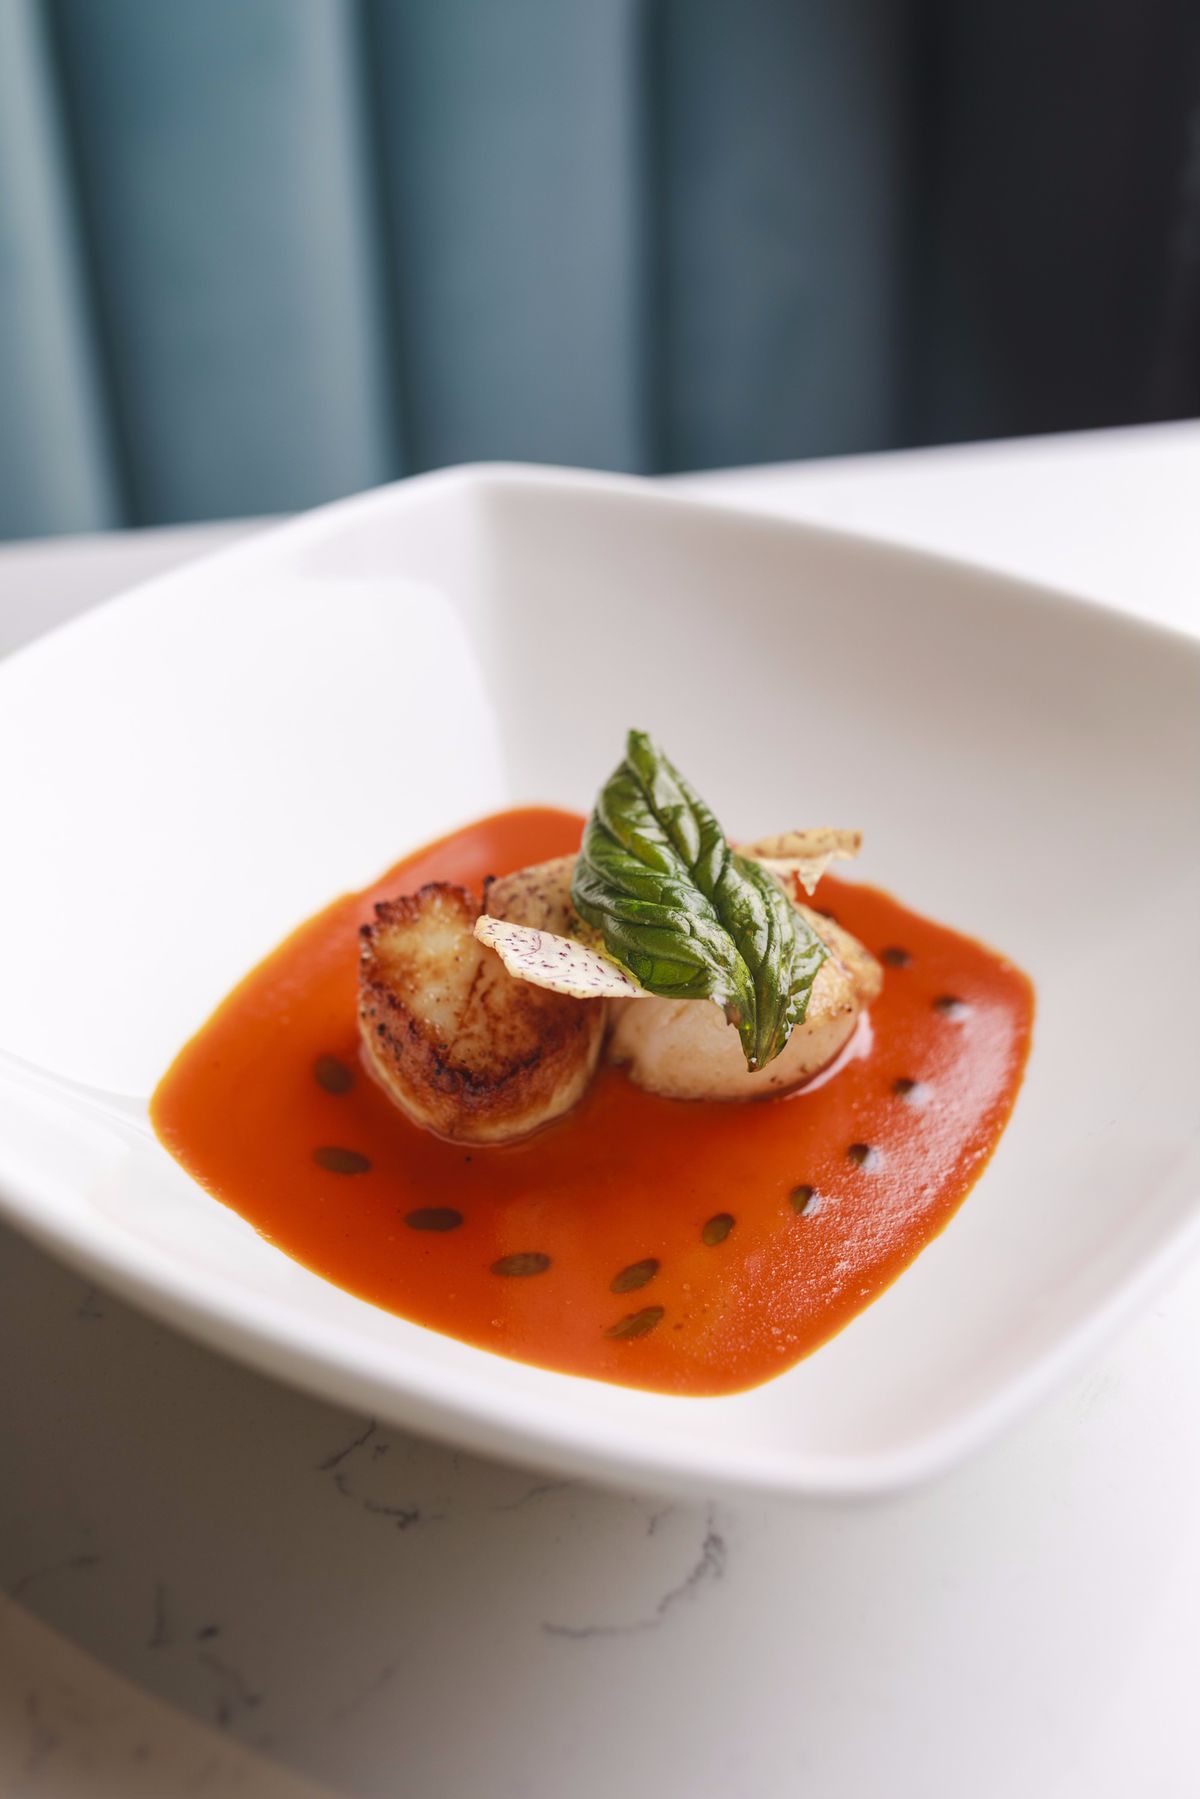 Scallops plated in a red sauce with dark dots of another sauce mixed in. A green herb garnishes the top of the scallops.